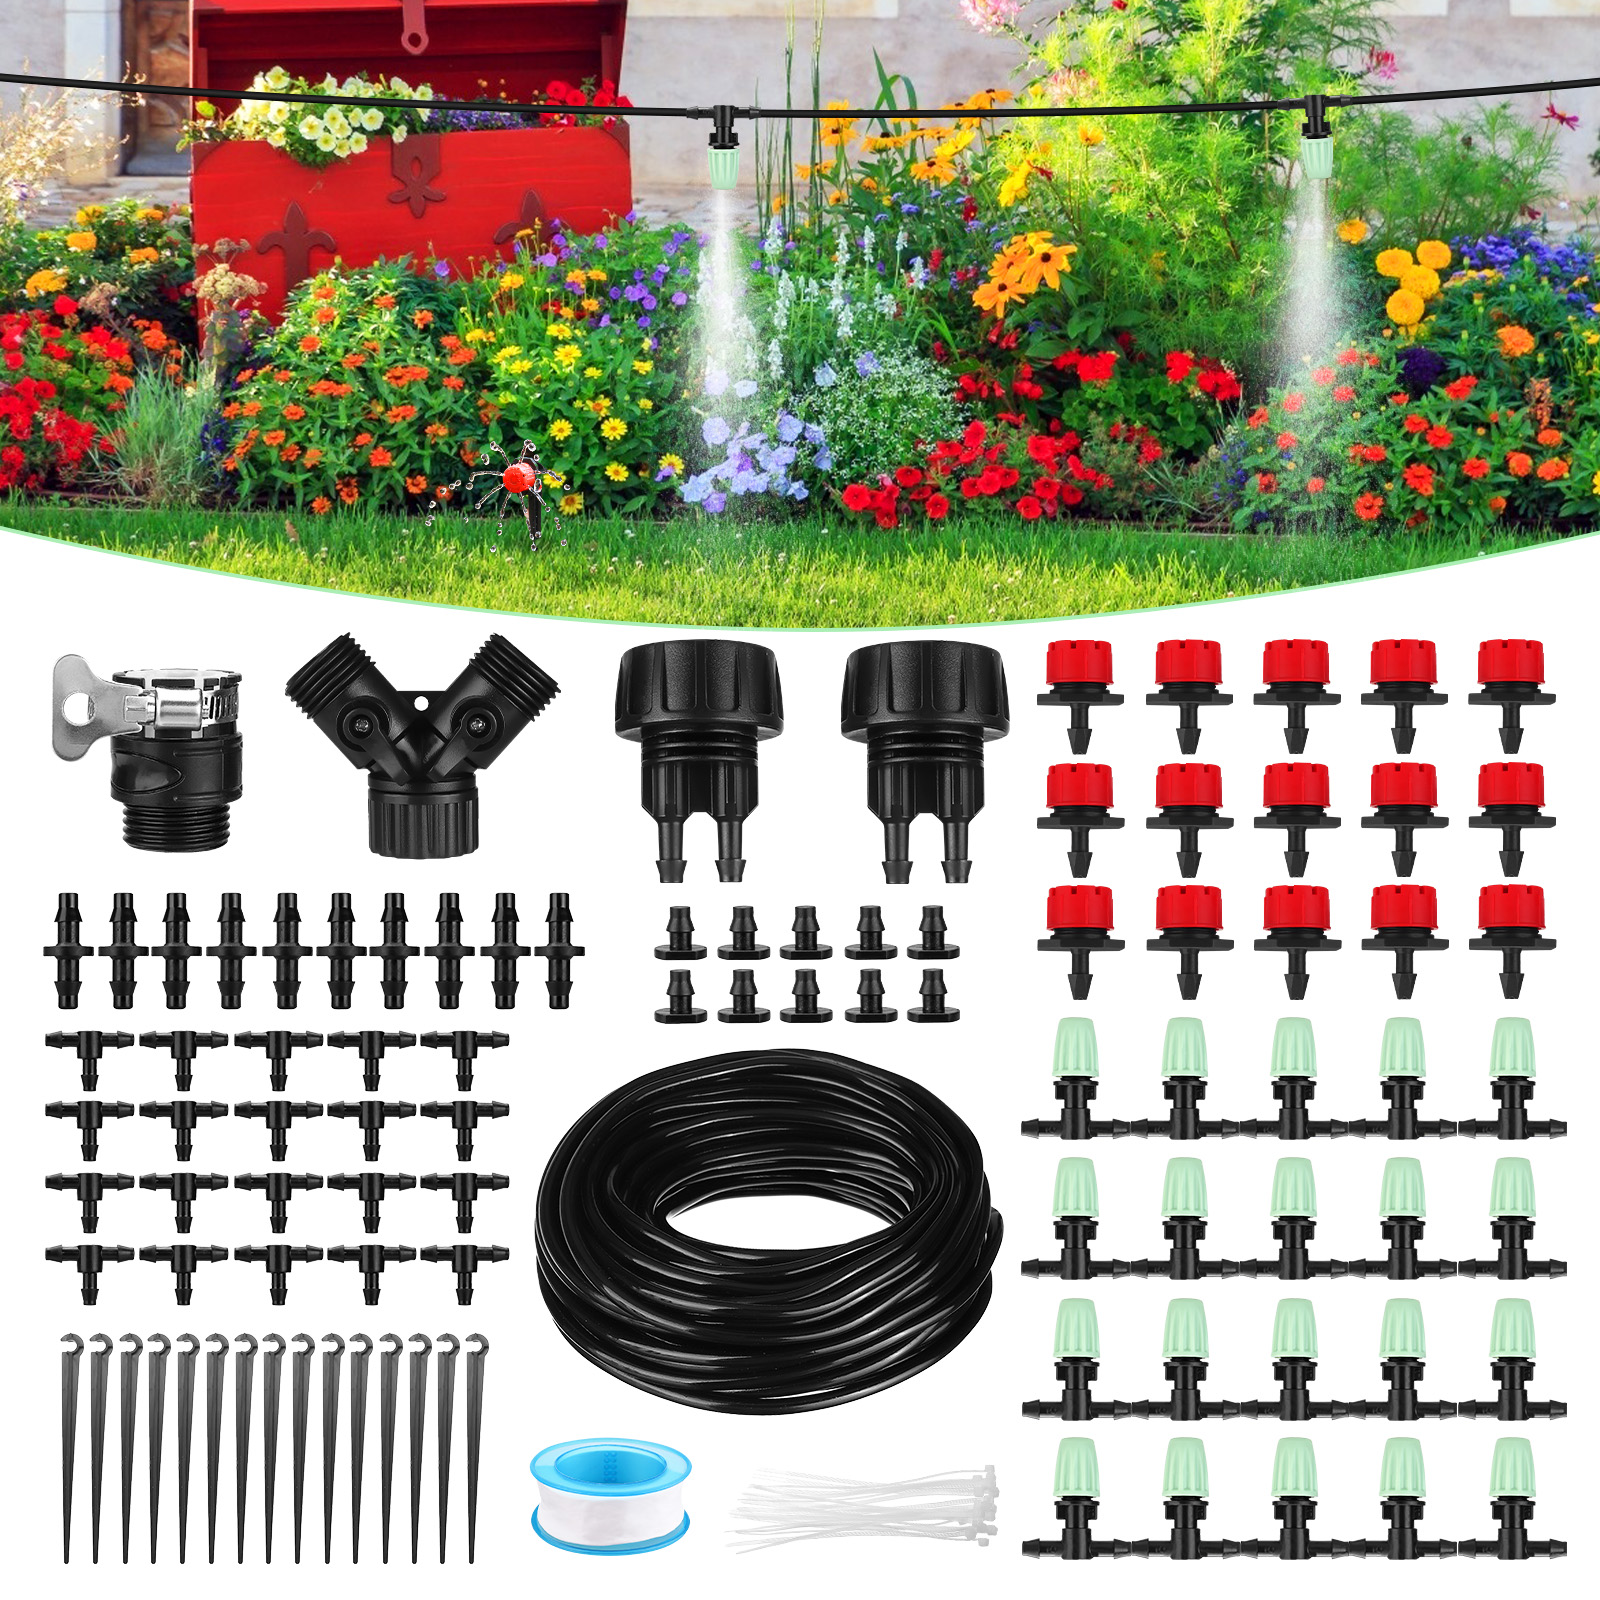 25M-Micro-Drip-Irrigation-Kit-DIY-Automatic-Drip-Irrigation-System-for-Garden-Greenhouse-Patio-1889798-2